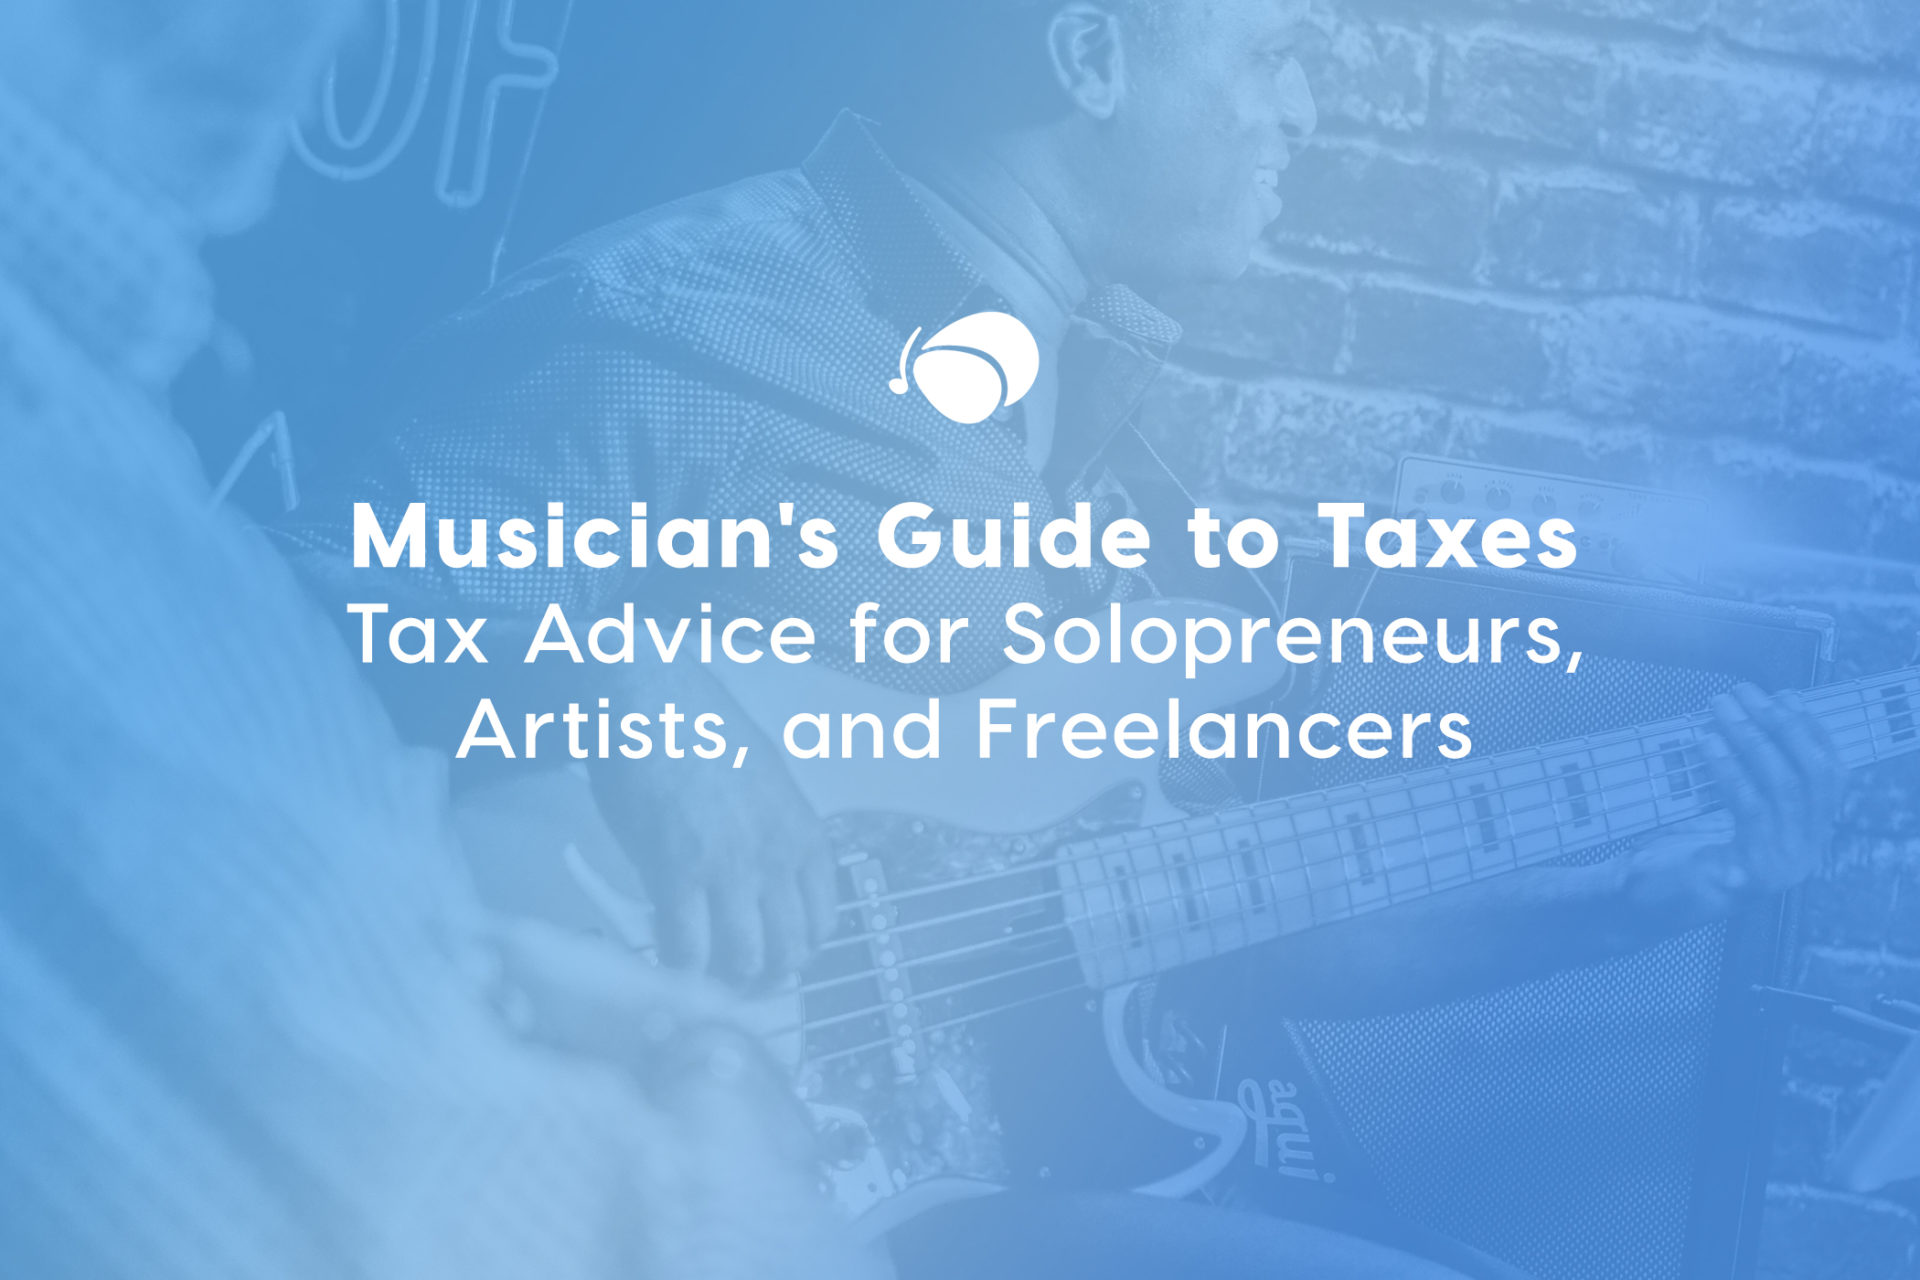 Musicians Guide to Taxes hero image